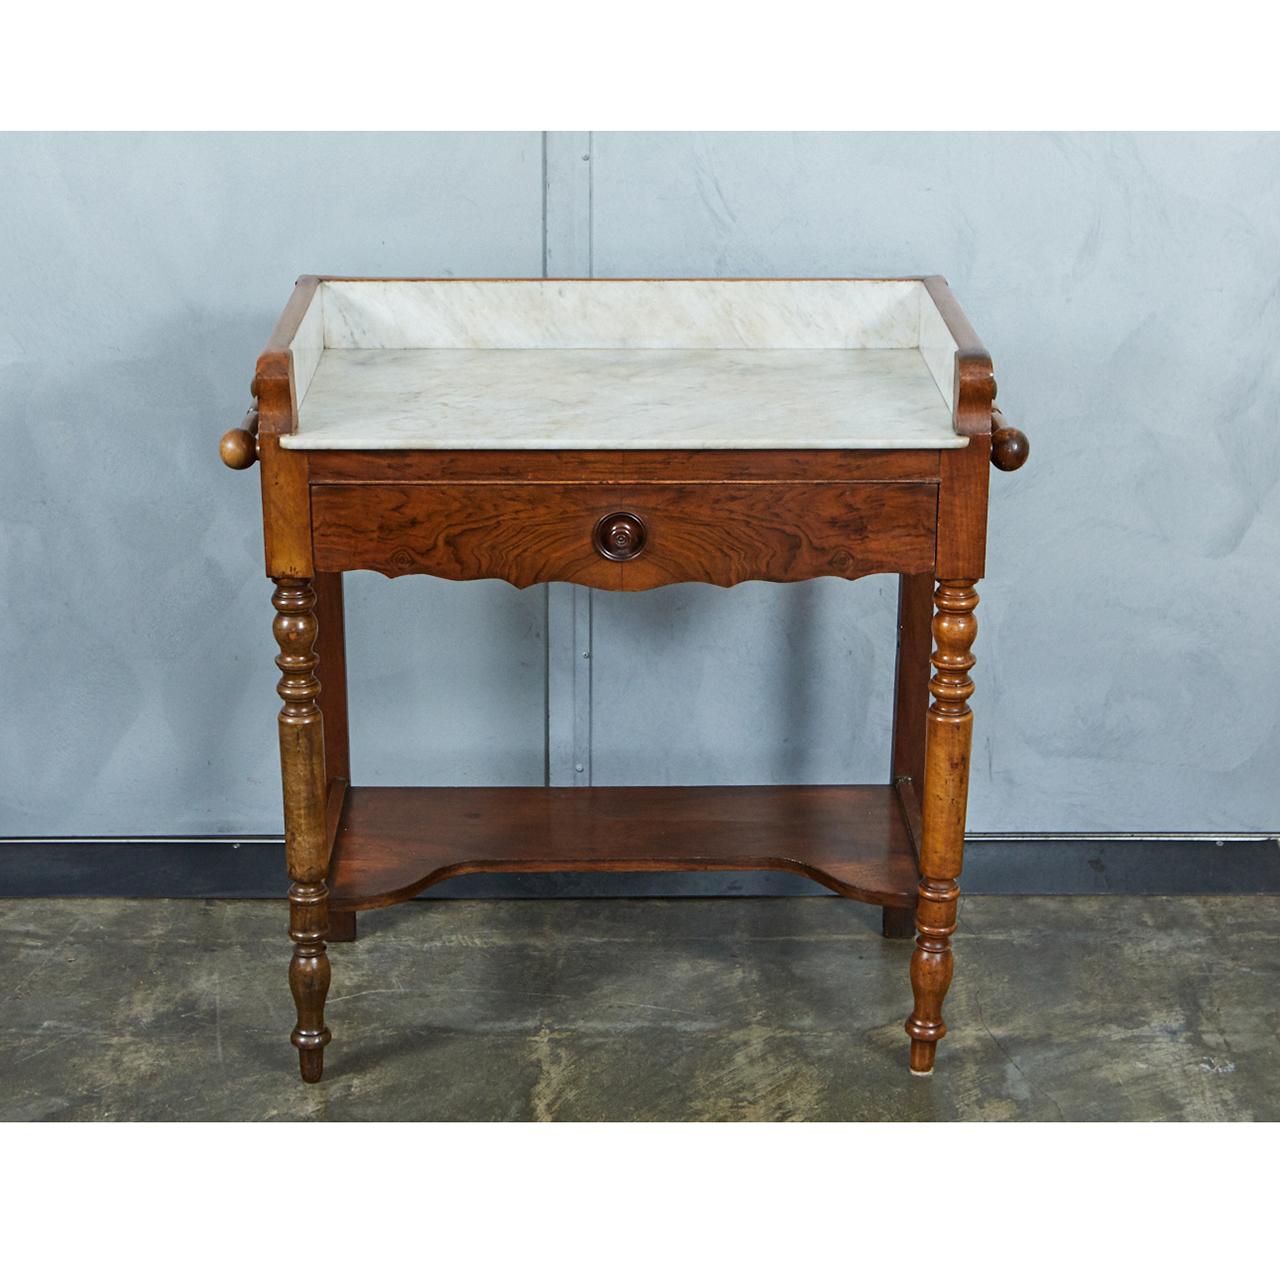 This diminutive French washstand is made from walnut with a marble top and gallery. The piece has a drawer with turned knob and divider. The piece has four turned legs, two turned handles at the sides and a small shaped shelf. We can picture this